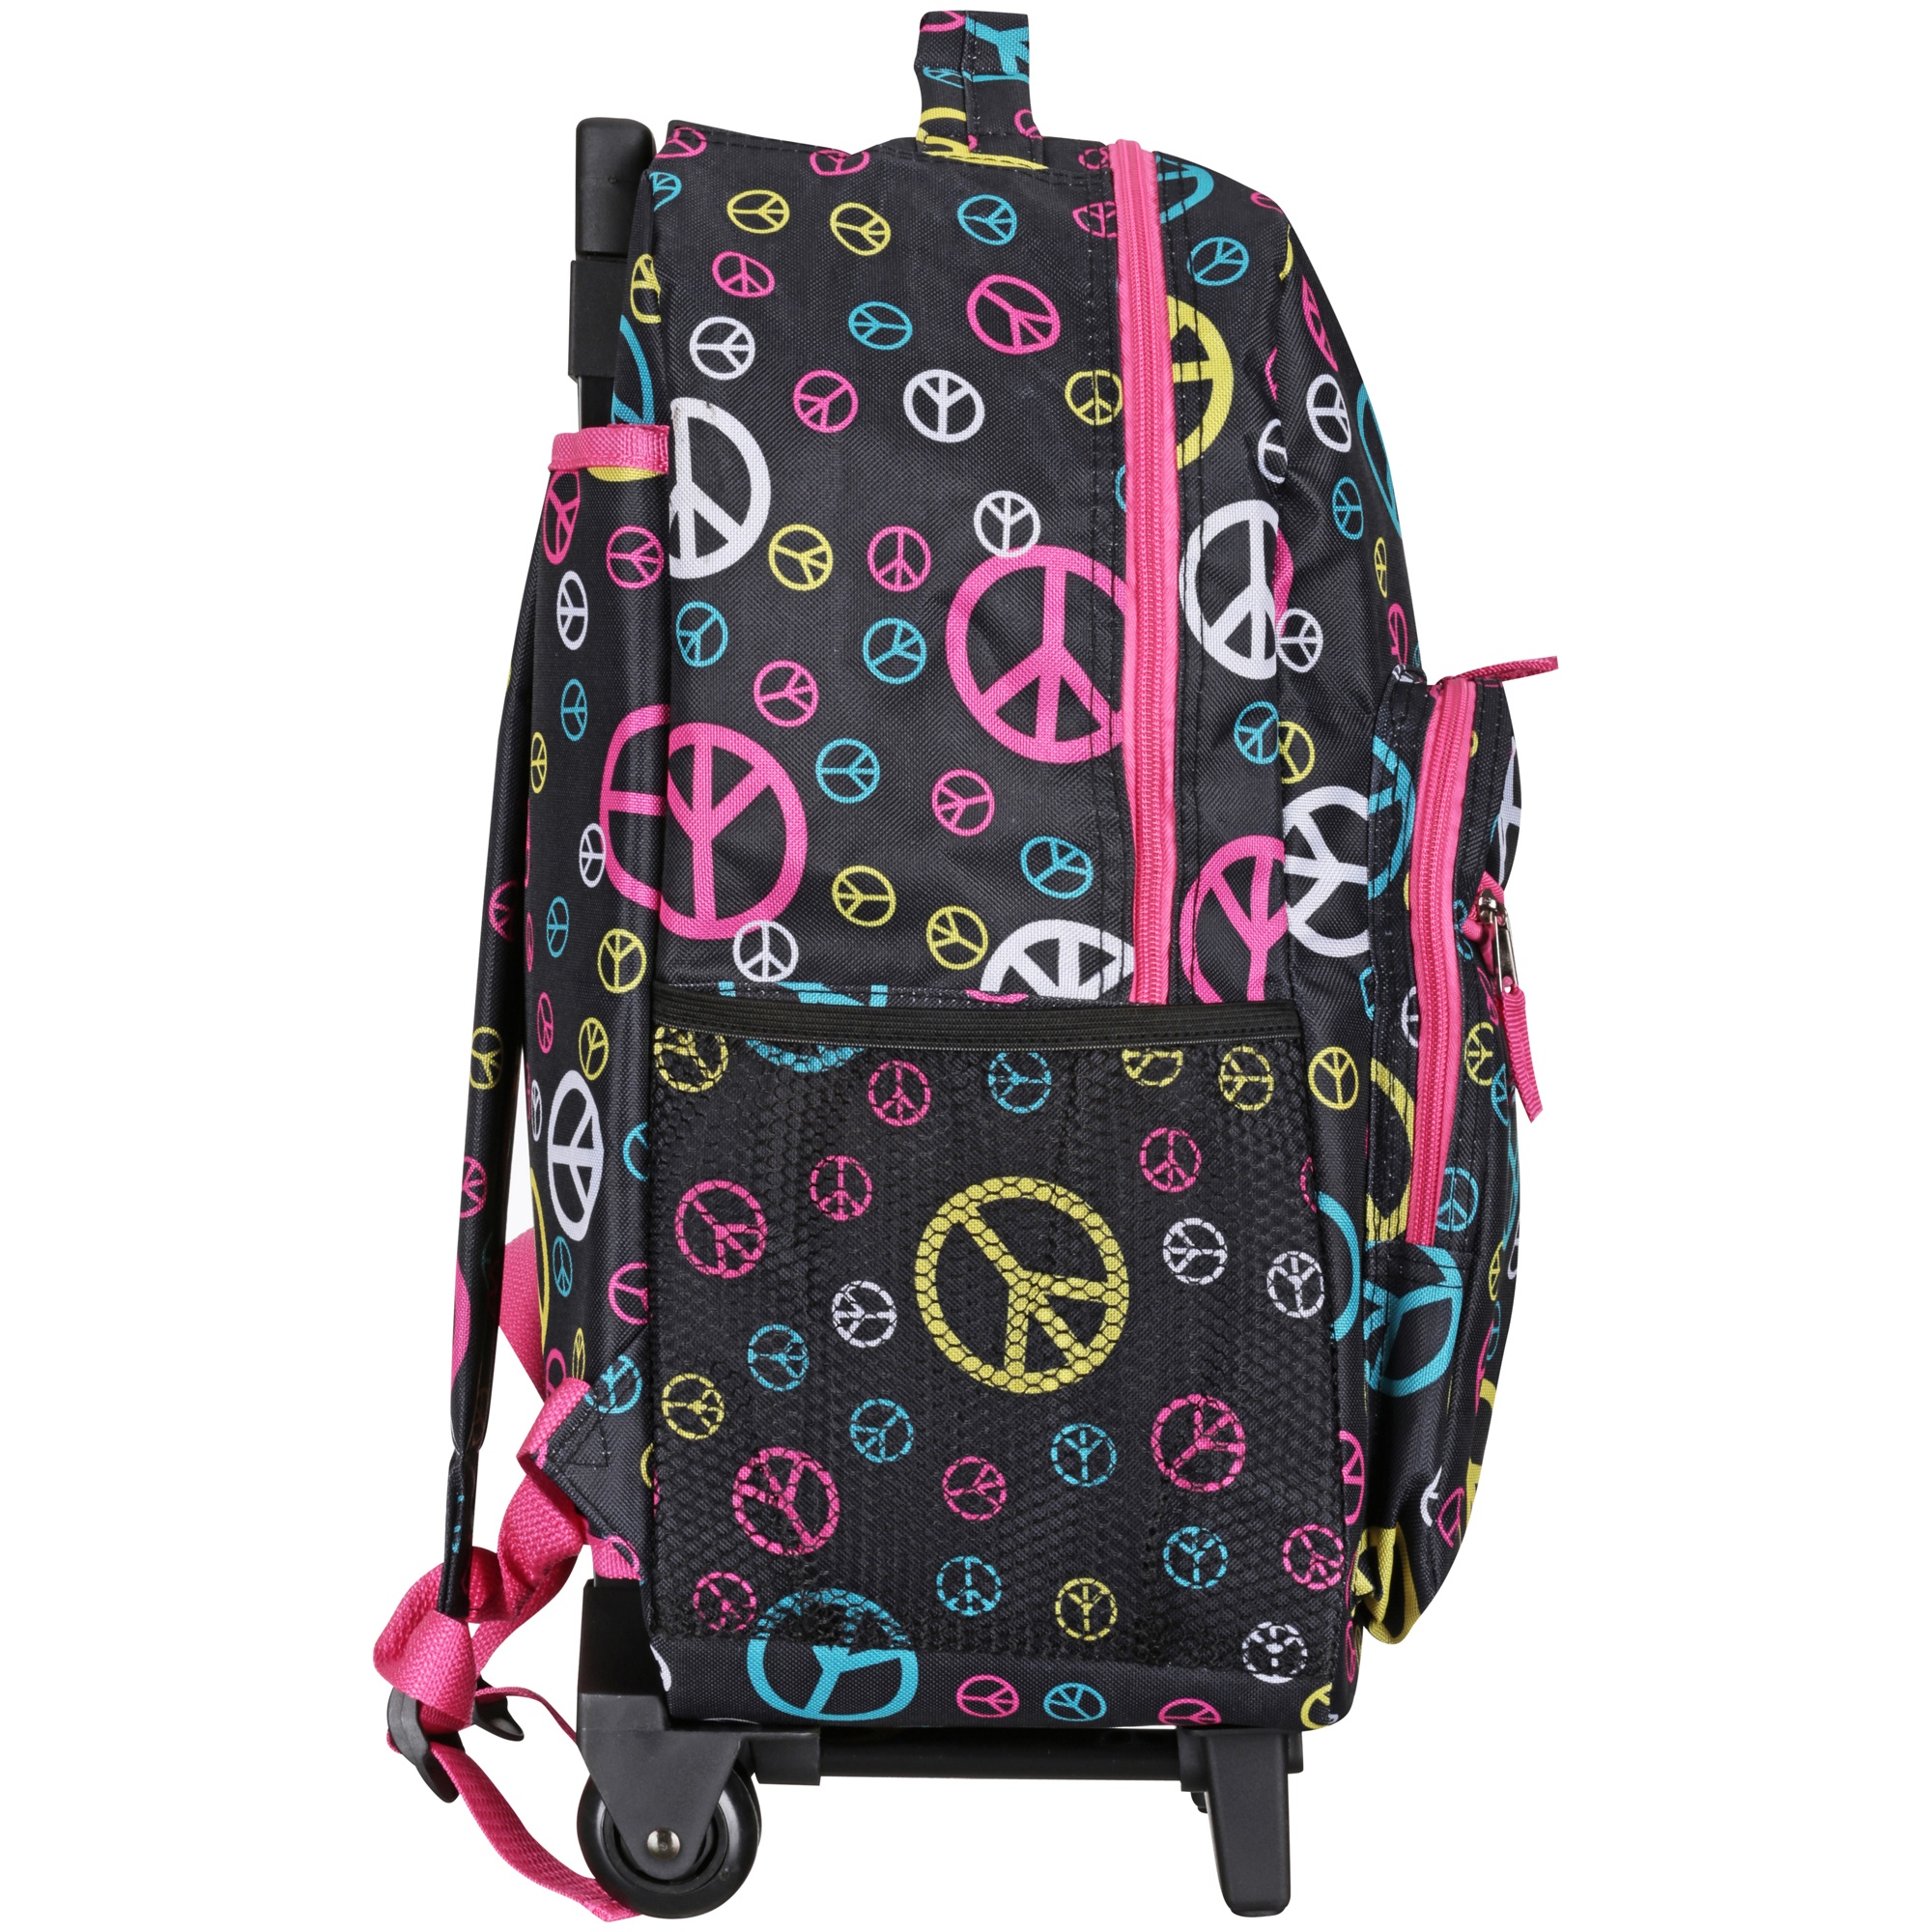 Rockland Unisex Luggage 17" Rolling Backpack R01 Peace - image 3 of 6